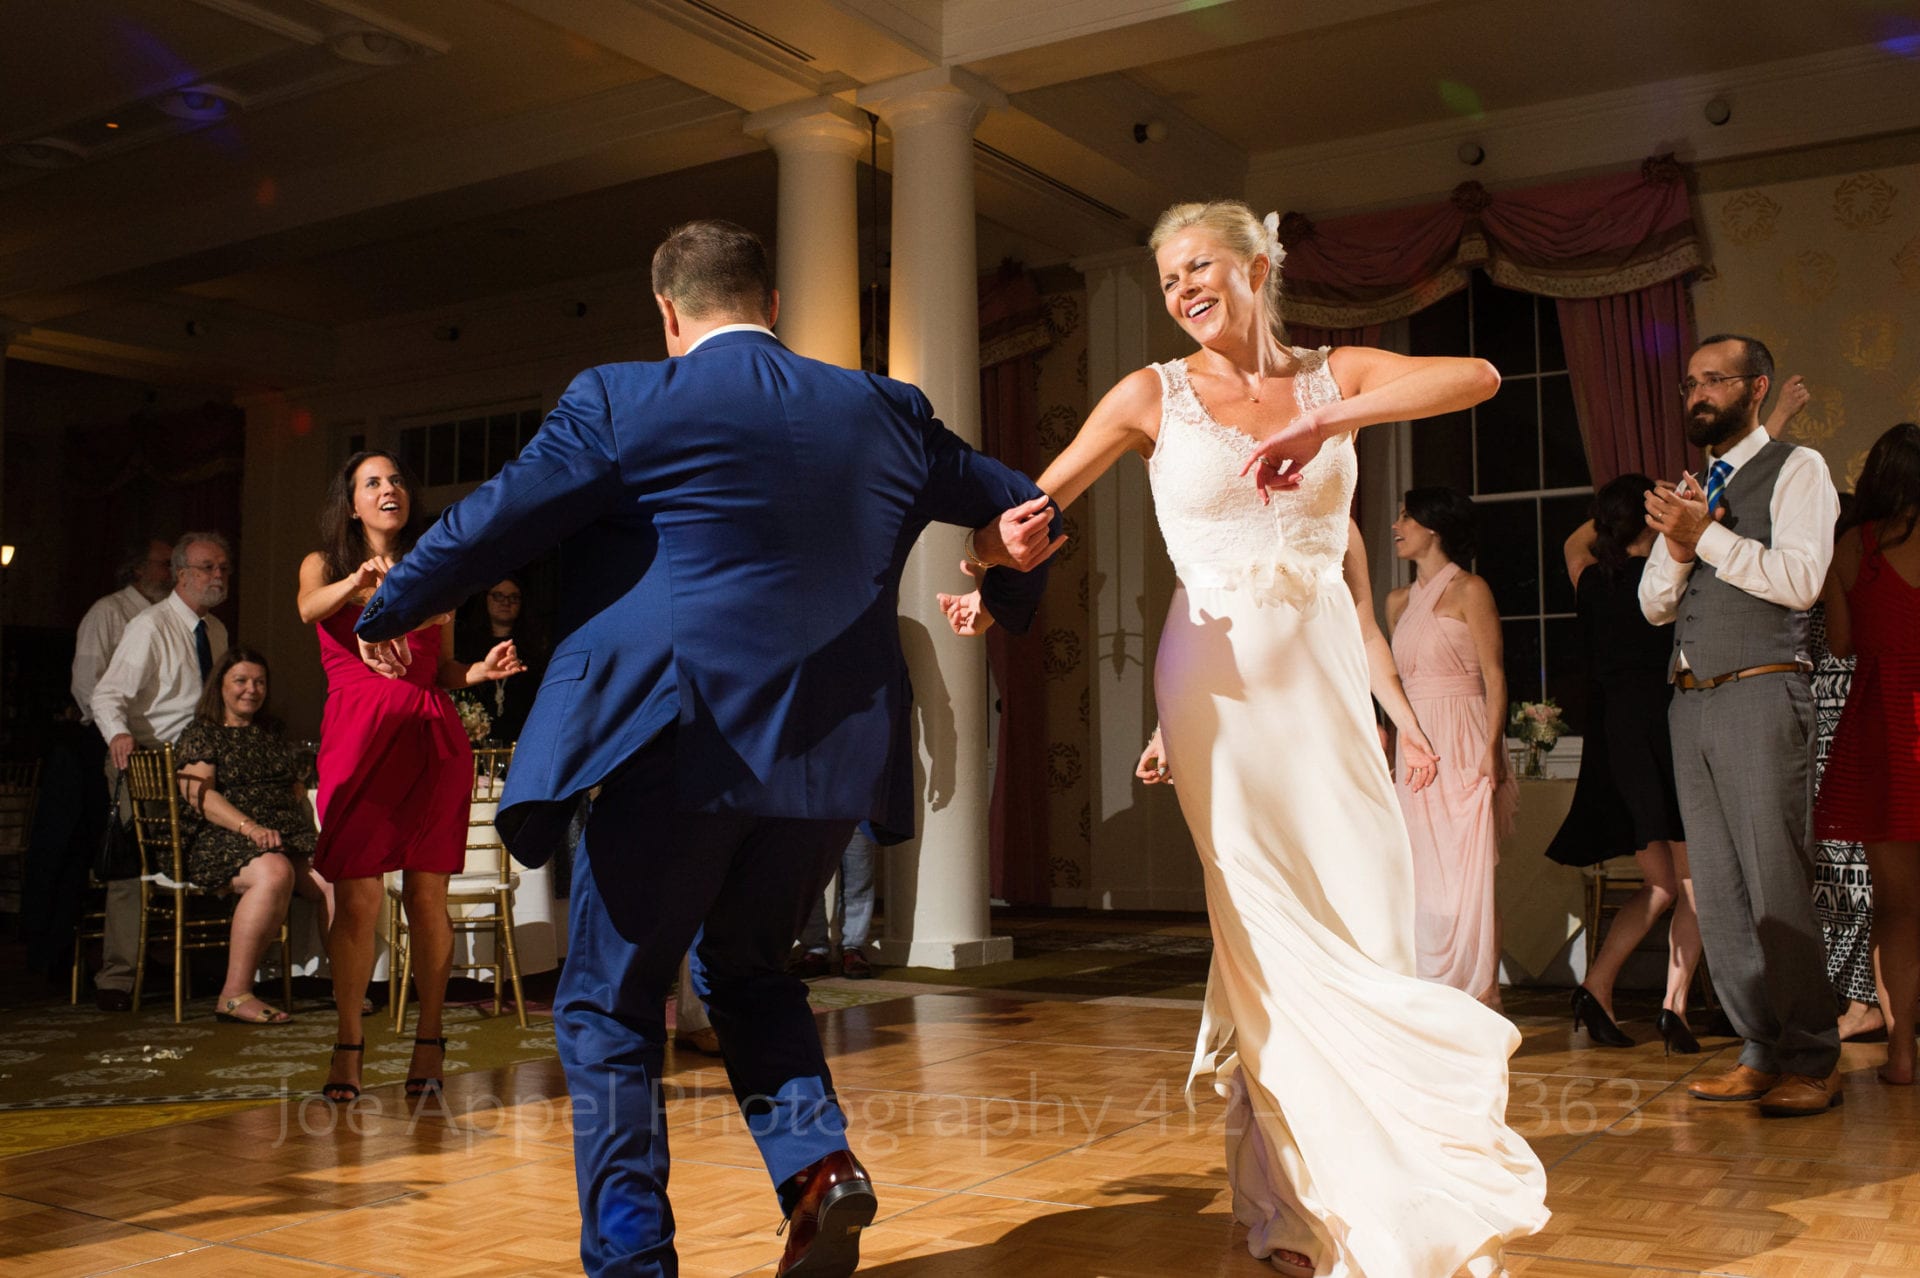 Bride and groom spin around a dance floor linked arms smiling.